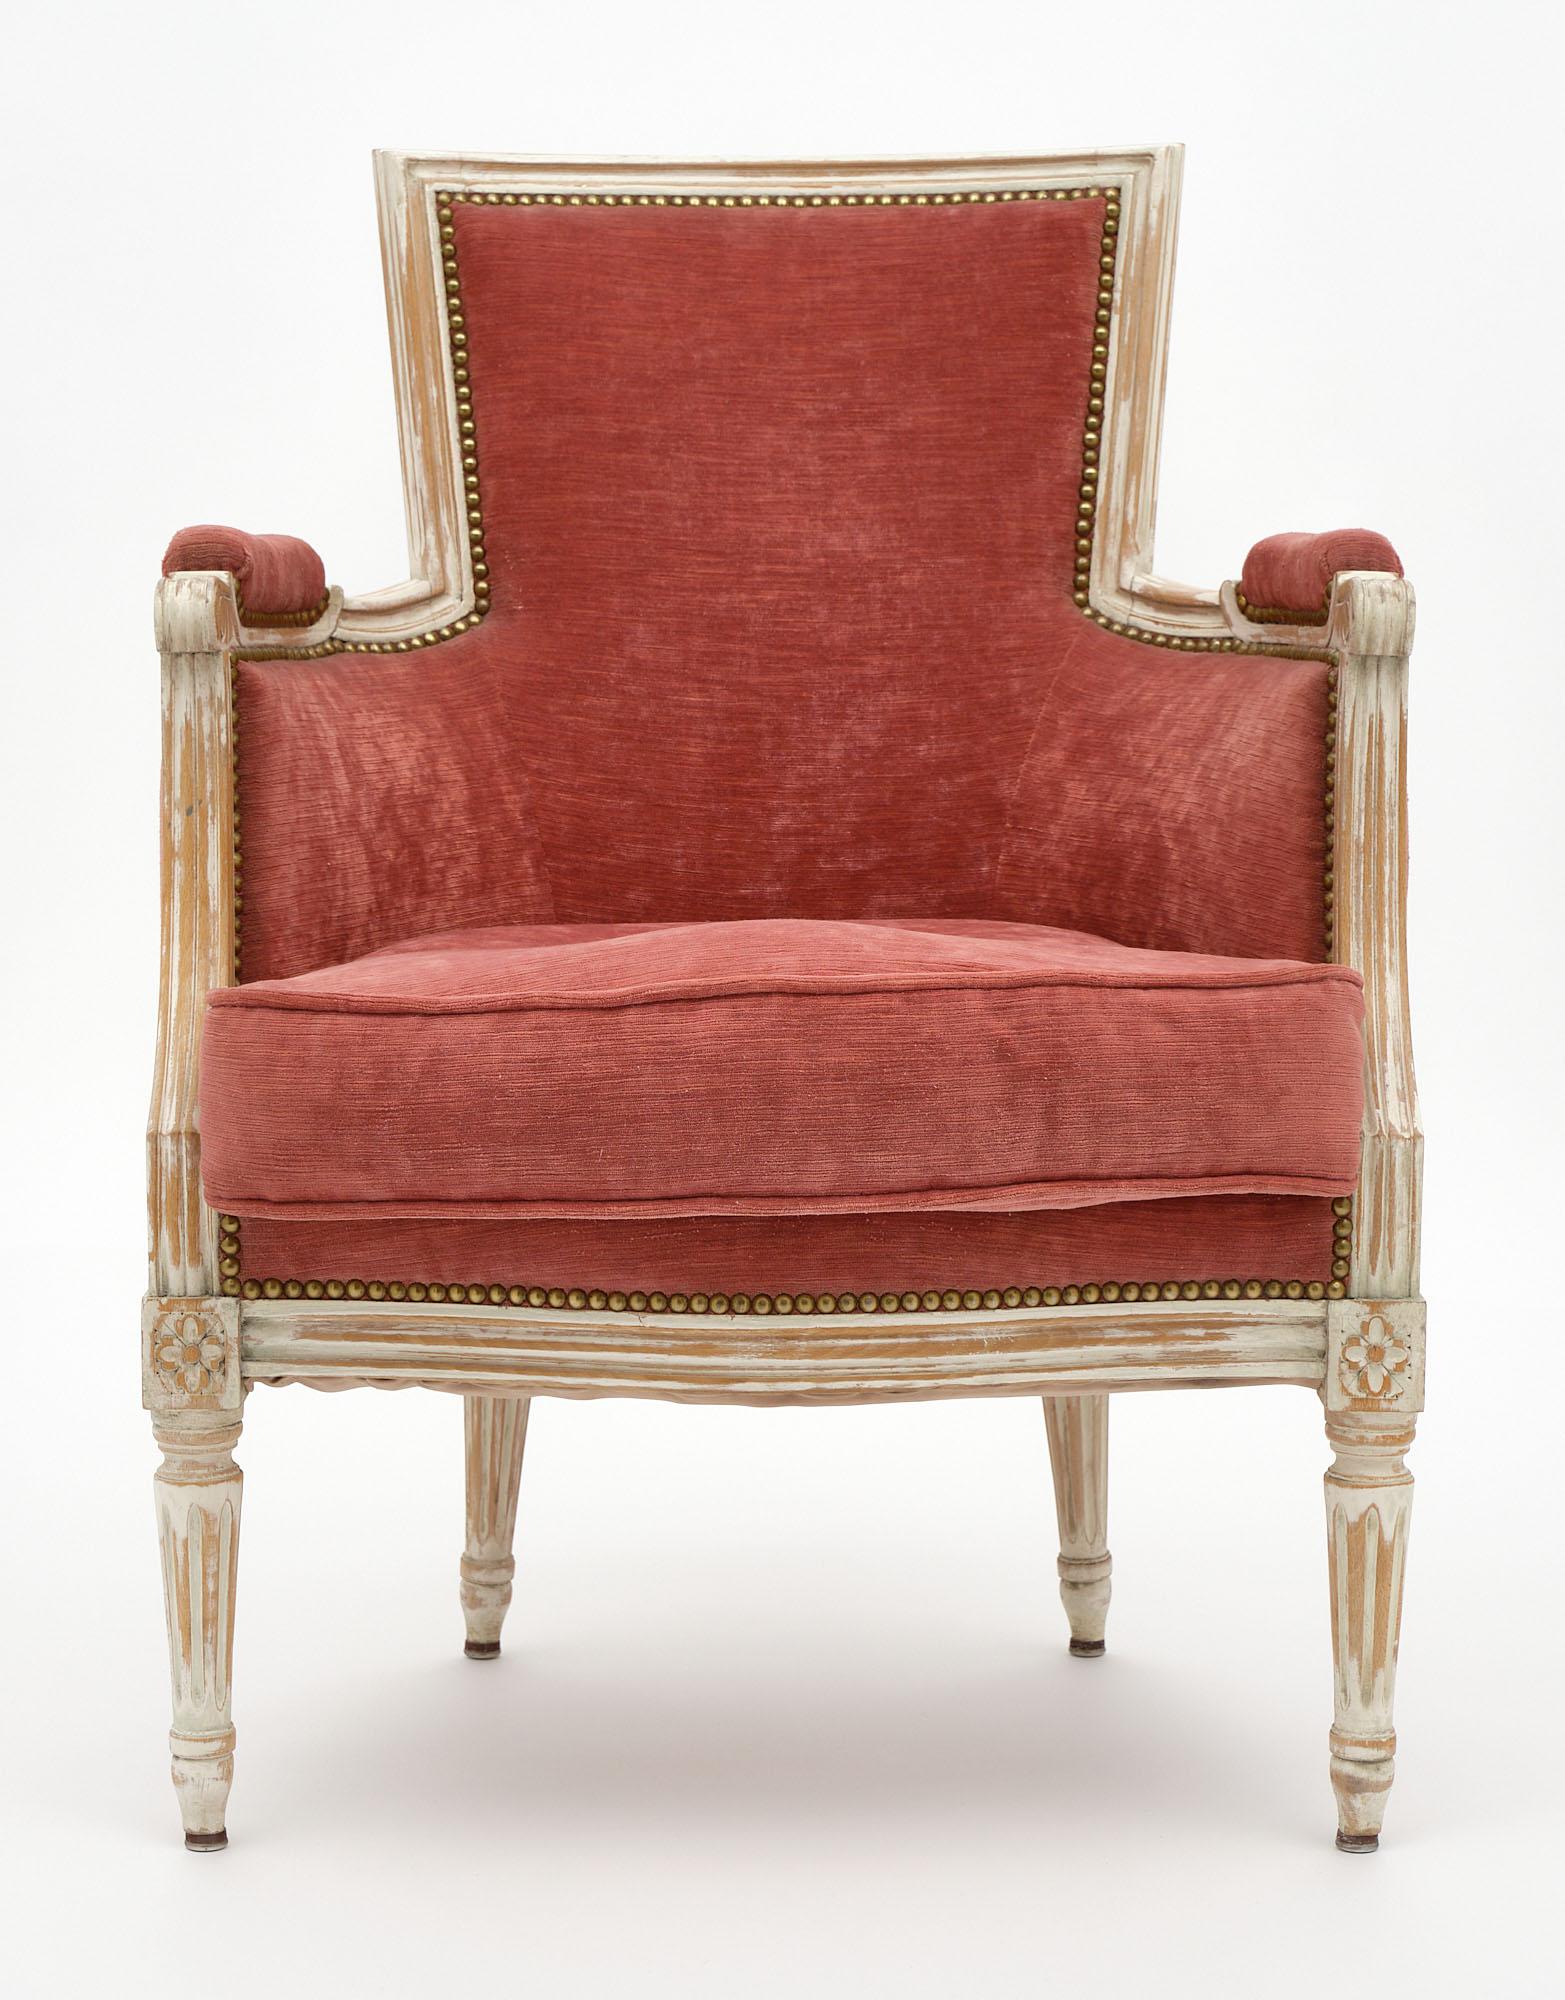 French bergère made of solid hand-carved beech wood with a beautiful patinated ivory colored lacquer. Original cotton velvet upholstery in a pink hue with the original brass tacks. Comfortable and in very good condition.